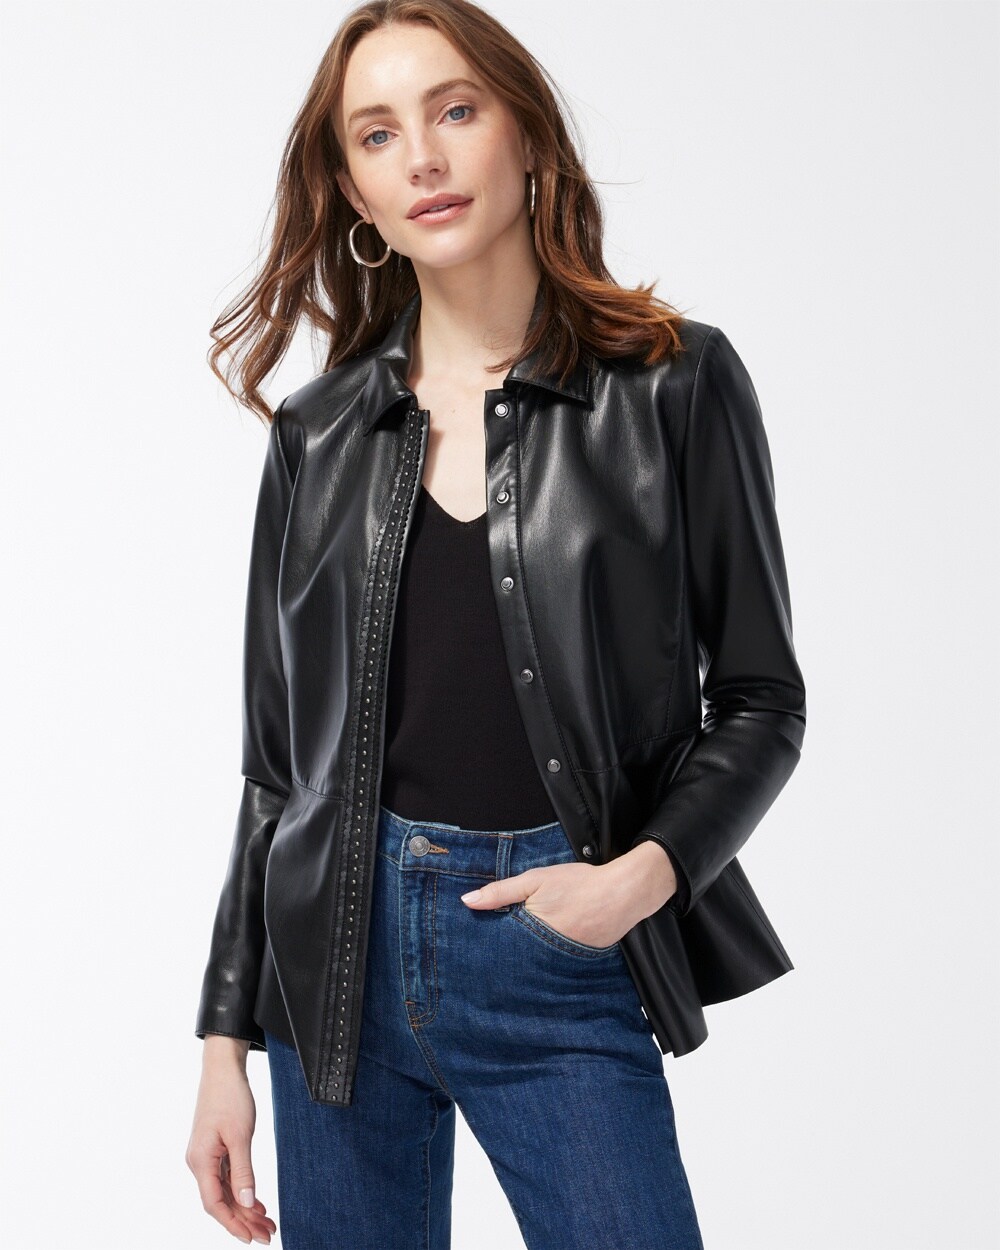 Riveted Faux Leather Peplum Jacket